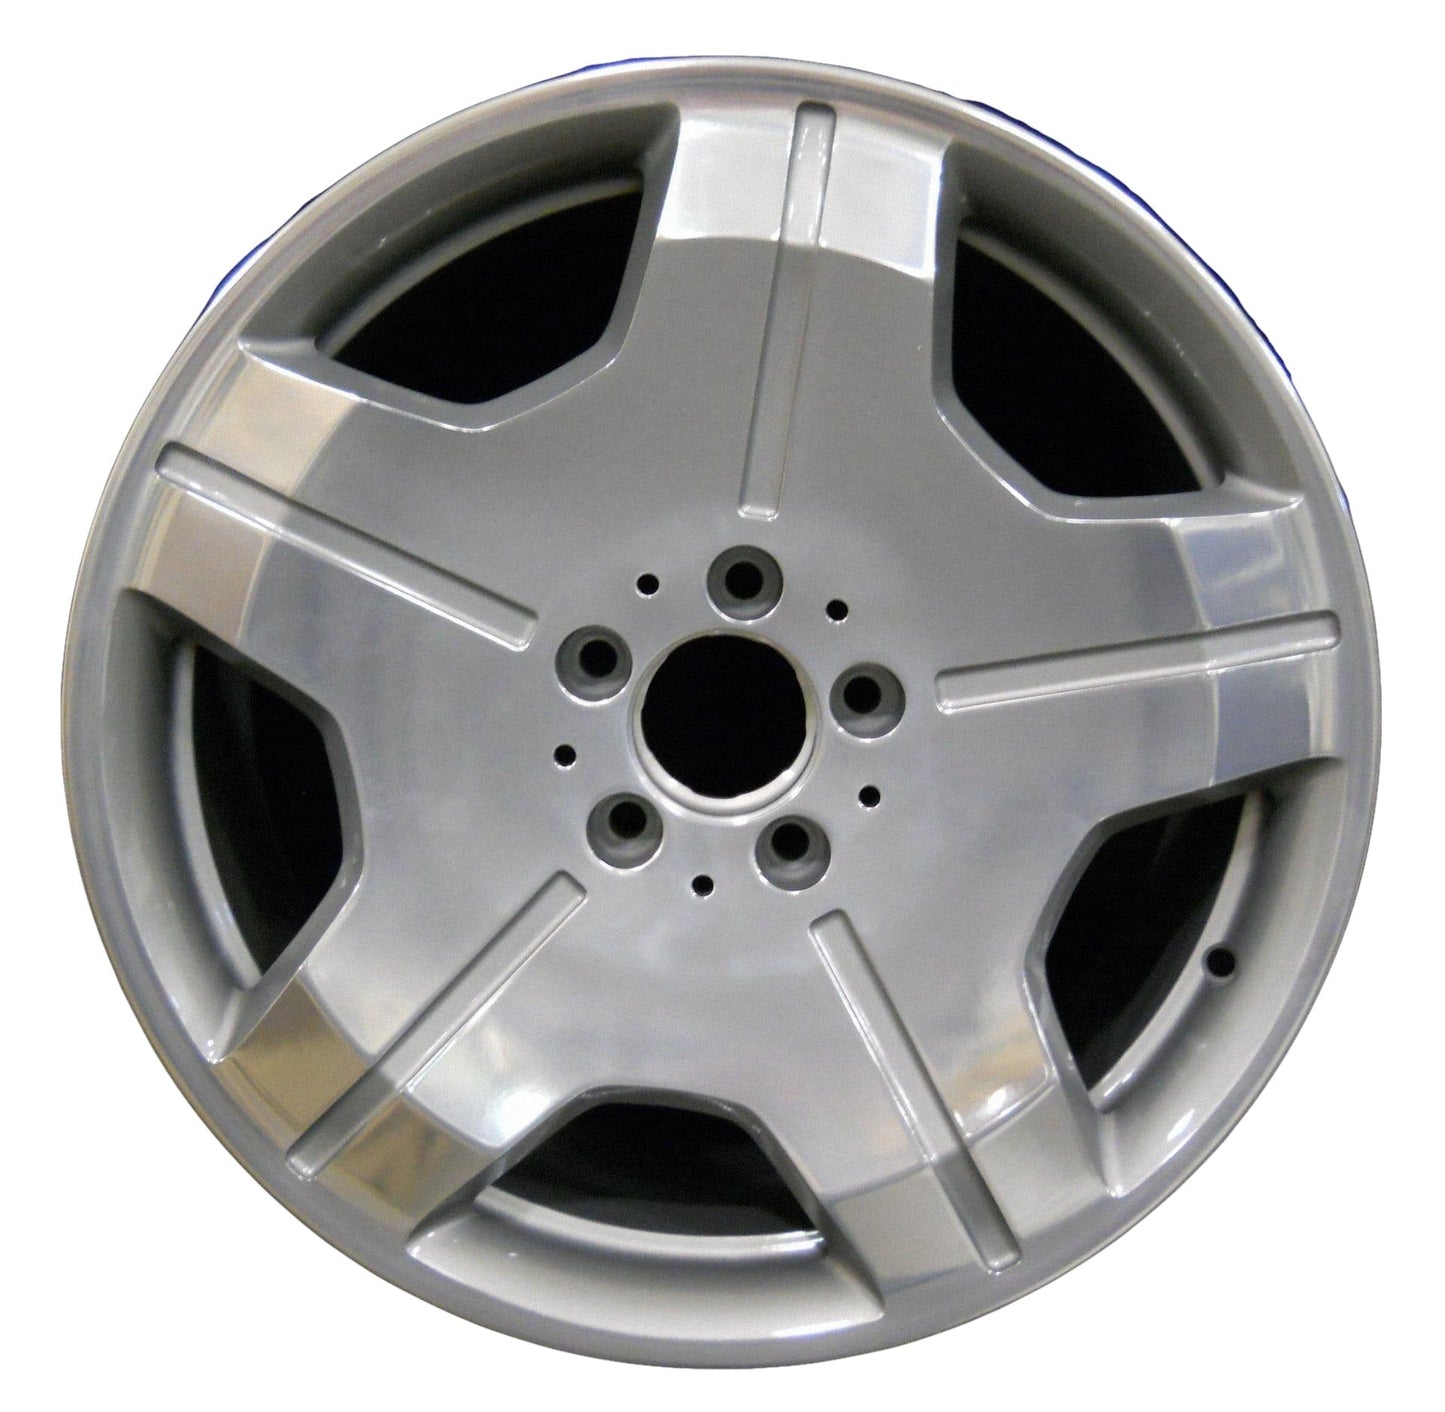 Mercedes CL600  2007, 2008, 2009 Factory OEM Car Wheel Size 18x9.5 Alloy WAO.65506RE.LC40.POL